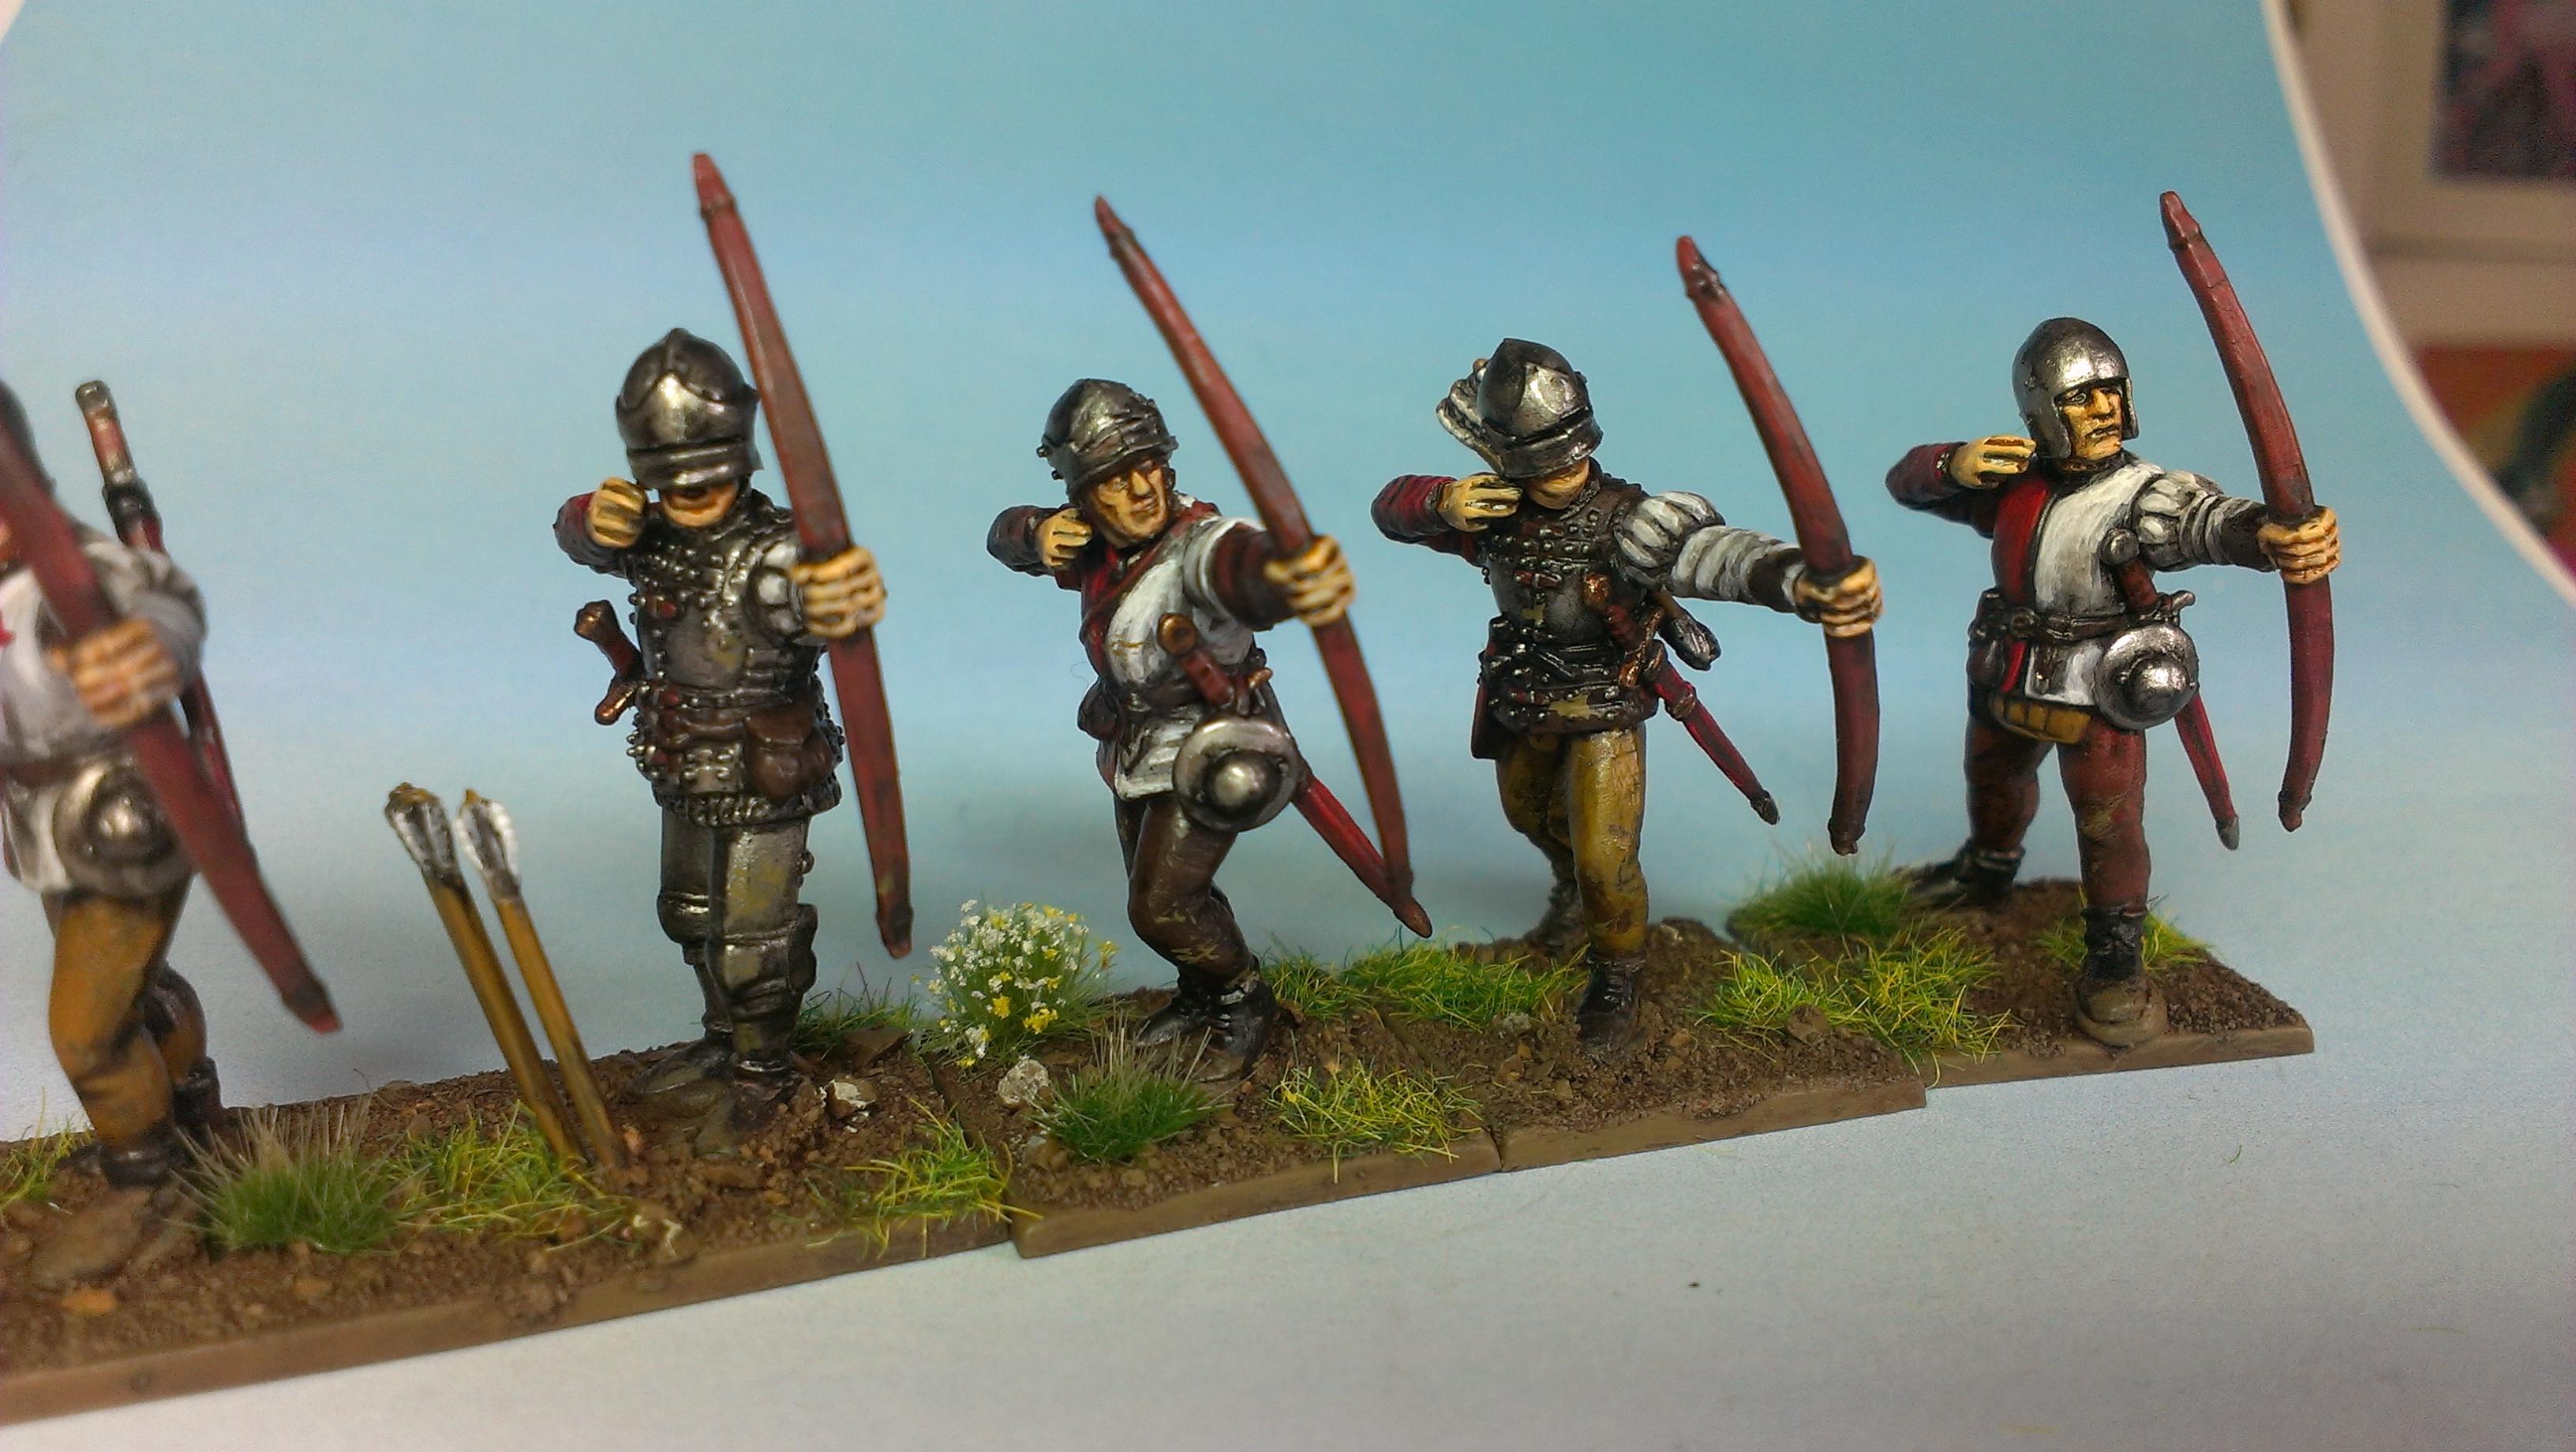 English, Historical, Hundred Years War, Perry Miniatures, Wab